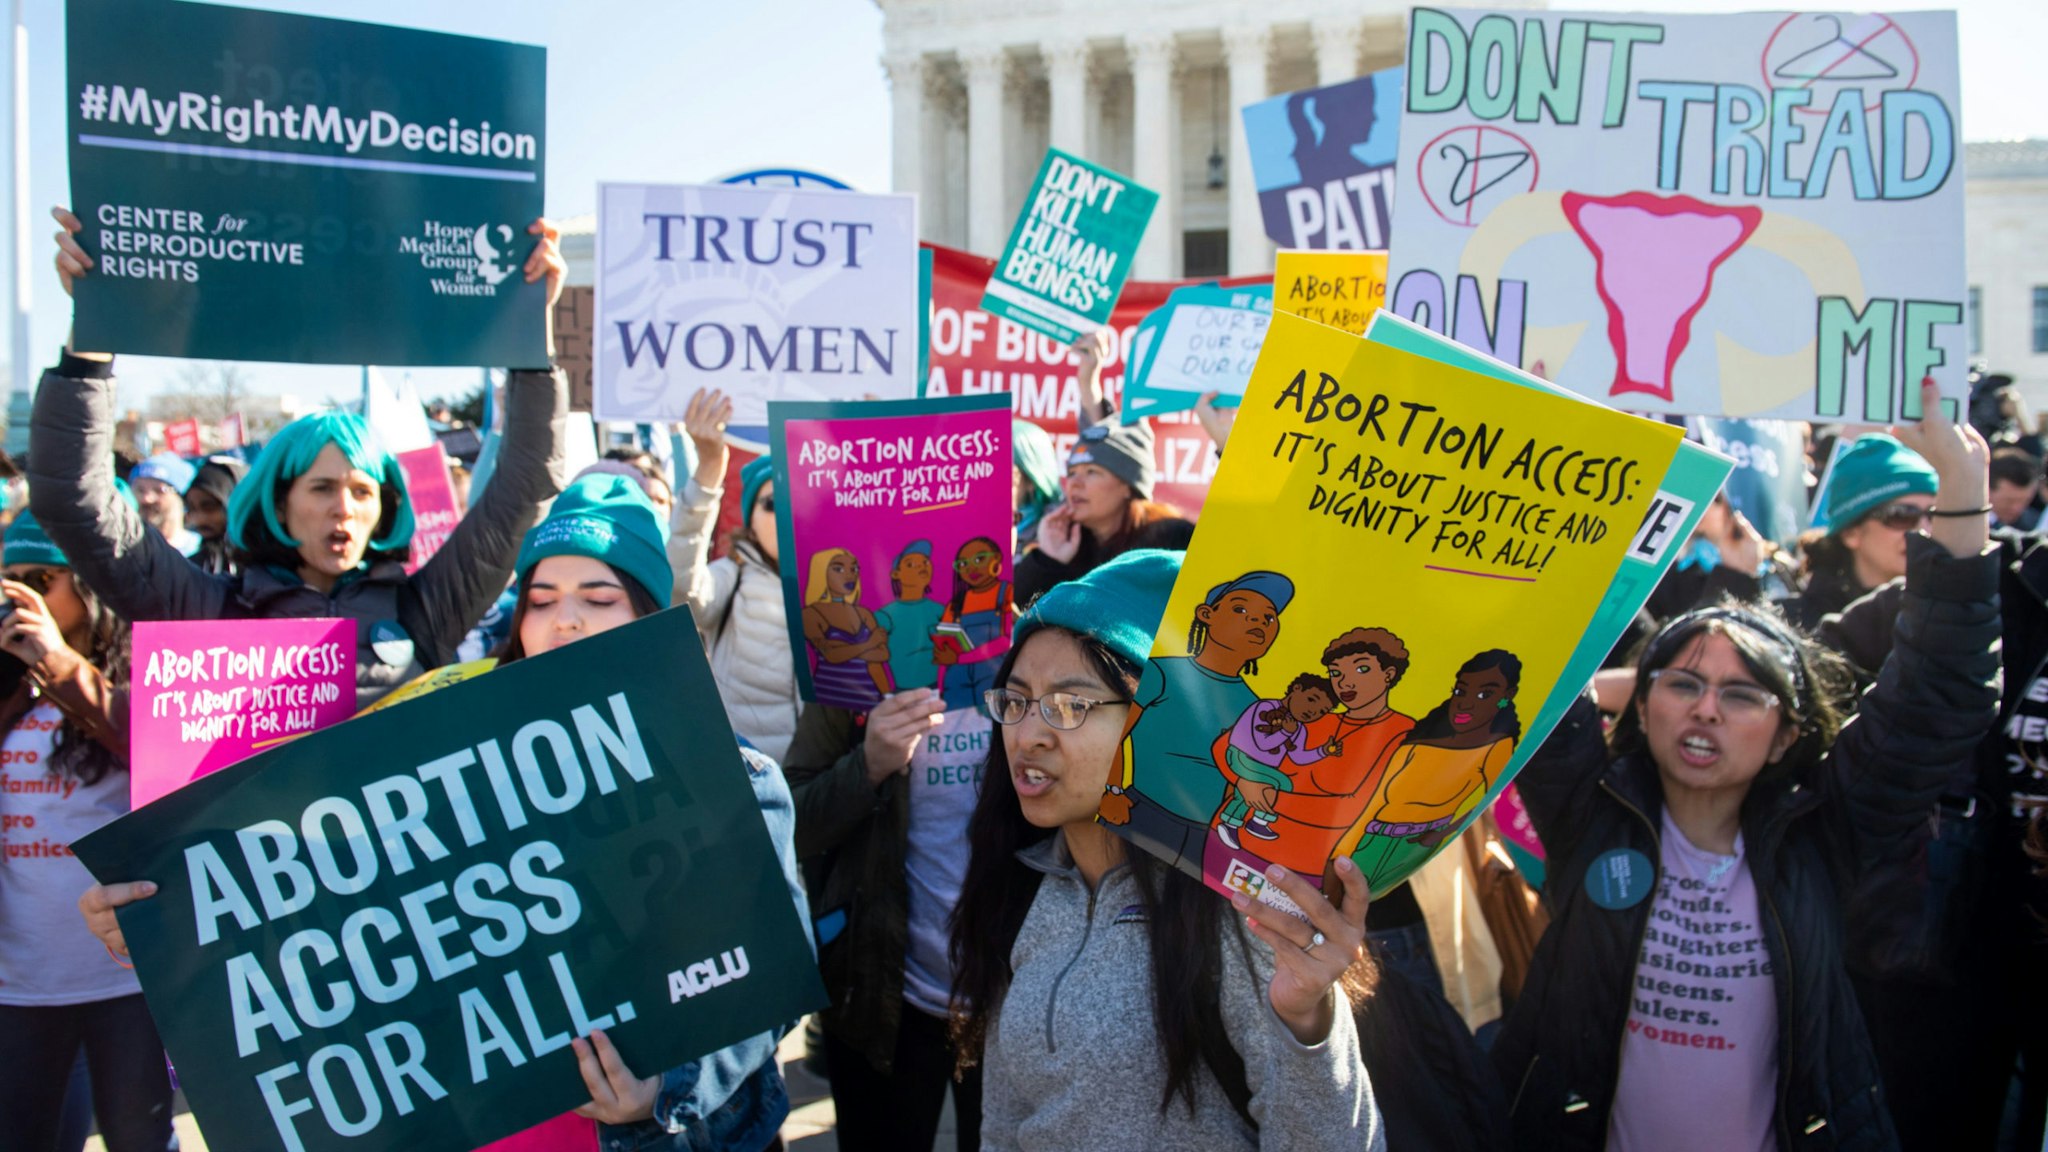 Pro-choice activists supporting legal access to abortion protest during a demonstration outside the US Supreme Court in Washington, DC, March 4, 2020, as the Court hears oral arguments regarding a Louisiana law about abortion access in the first major abortion case in years.